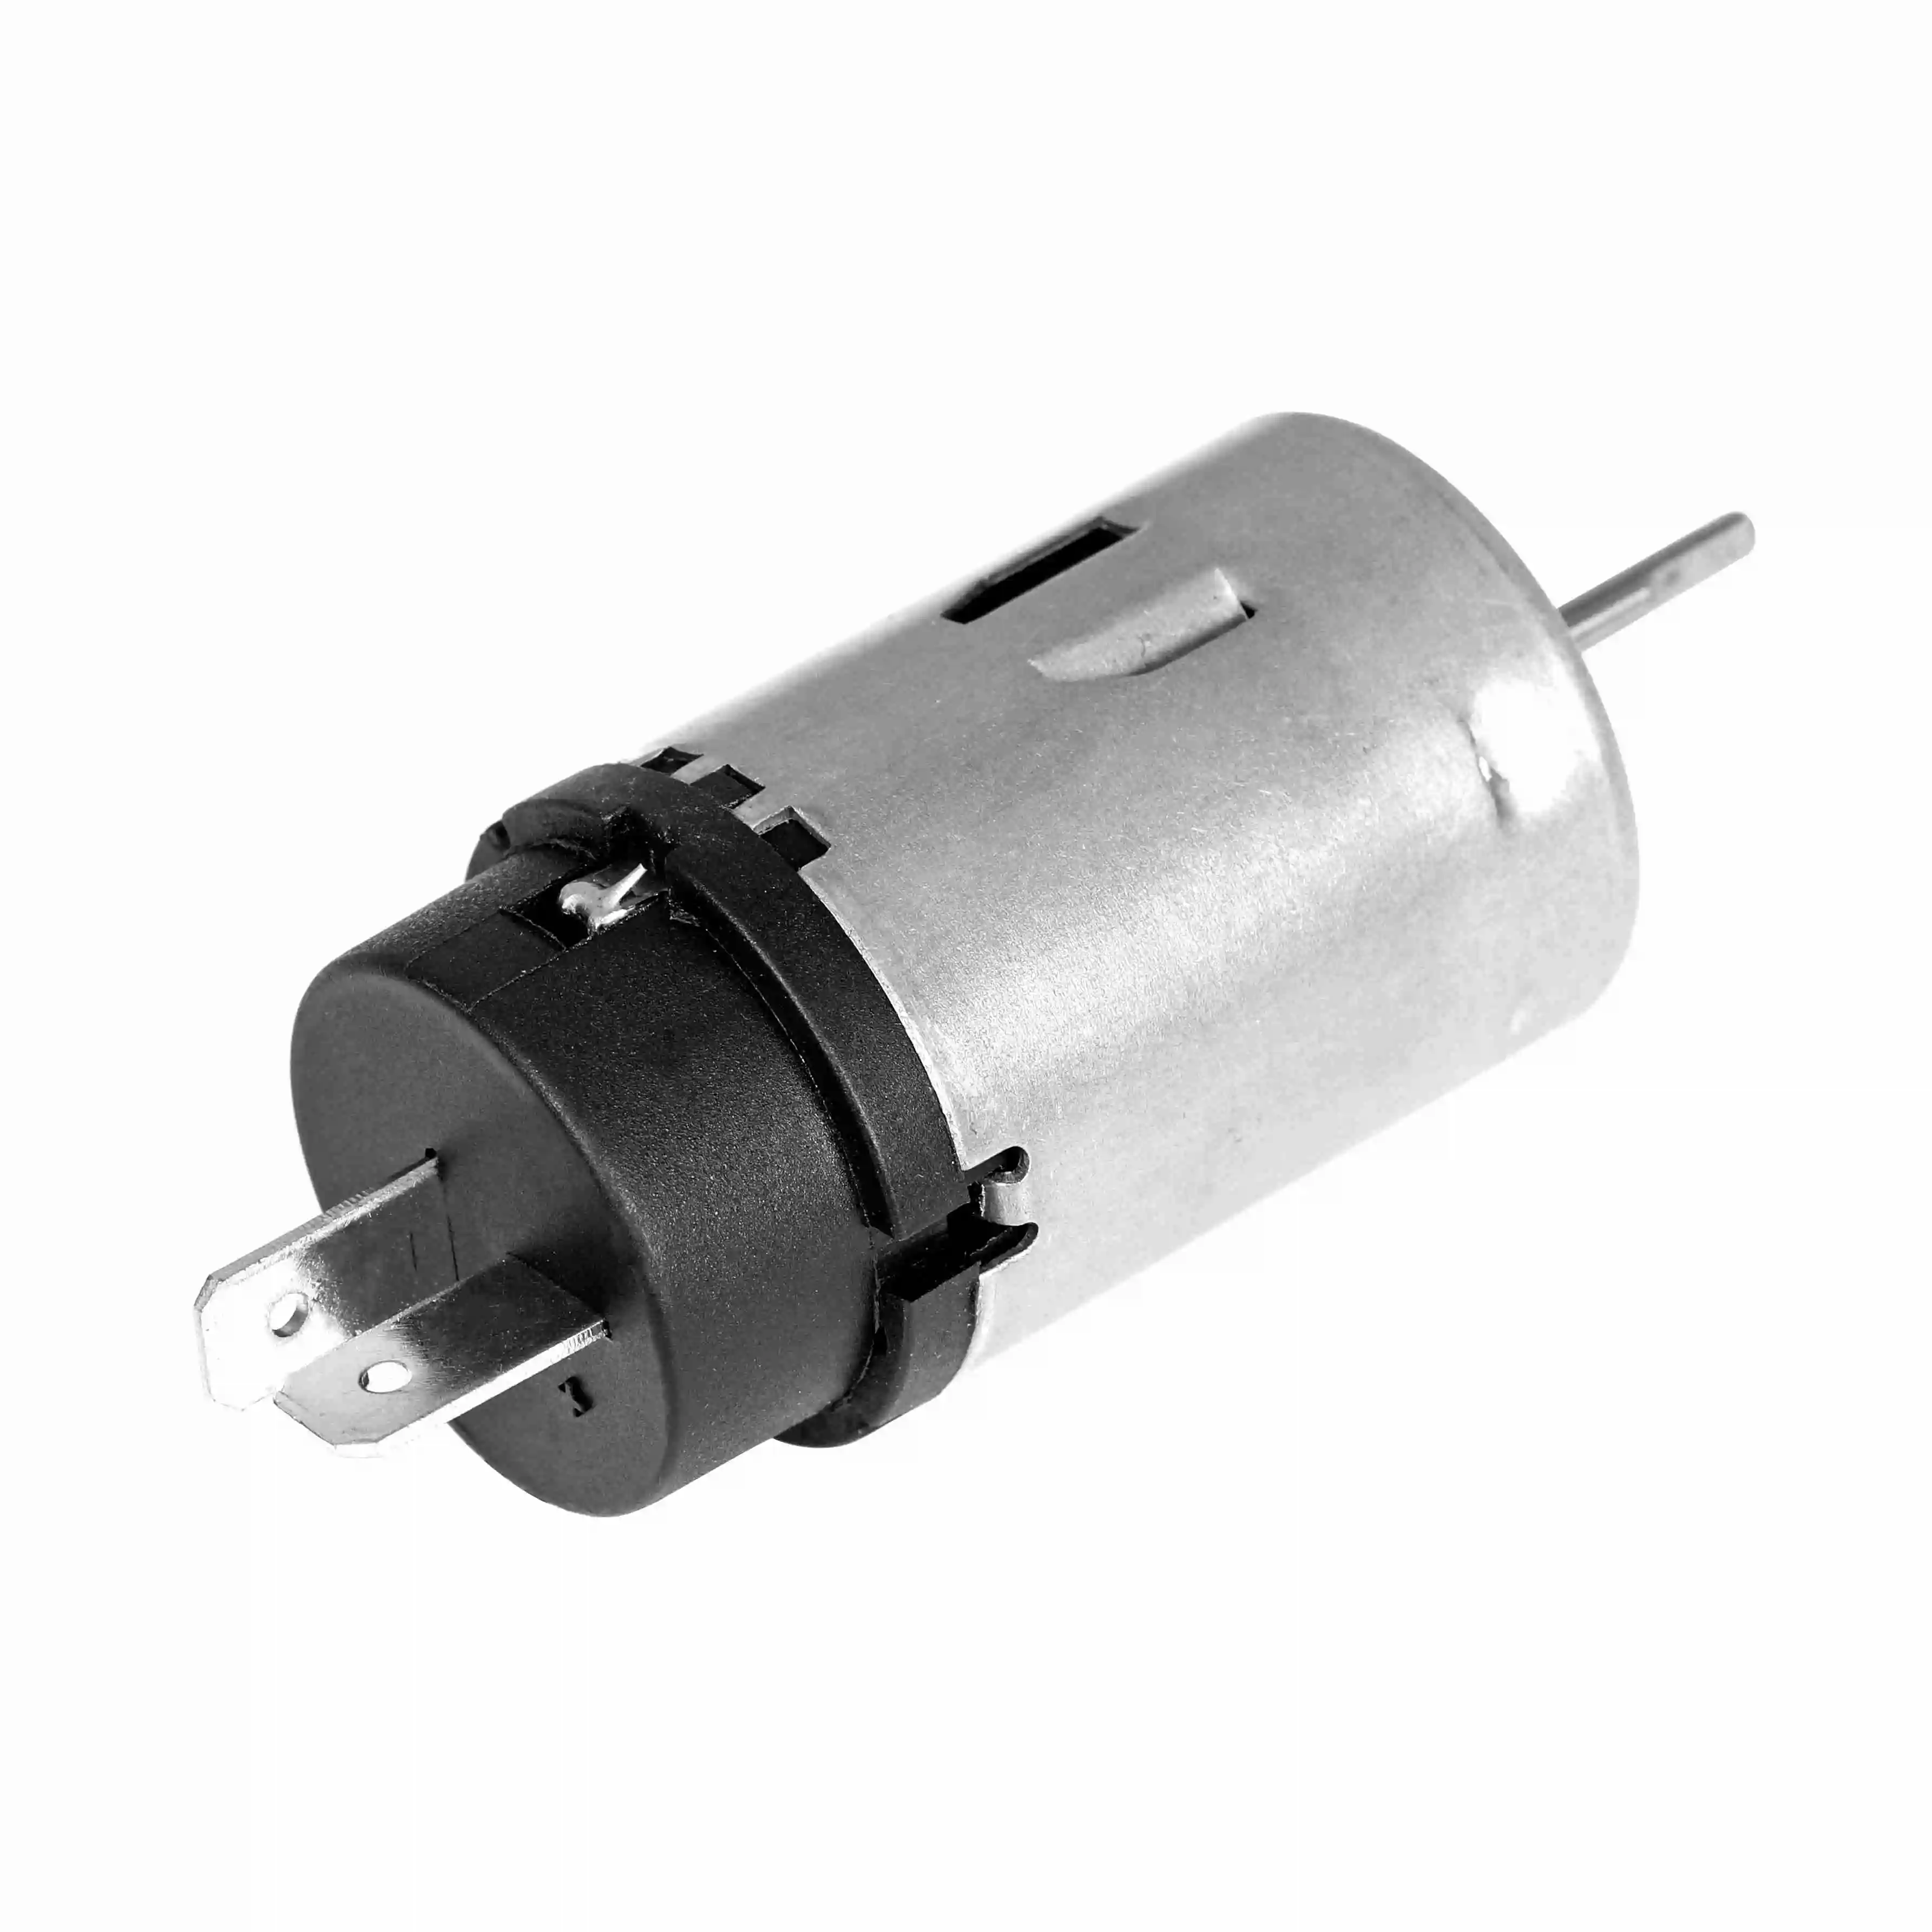 DMC Wholesale High Speed Rpm Dc Motor 13v 21800rpm Car Micro Motor Windshield Washer Pump Actuator Motor For Washer Pump